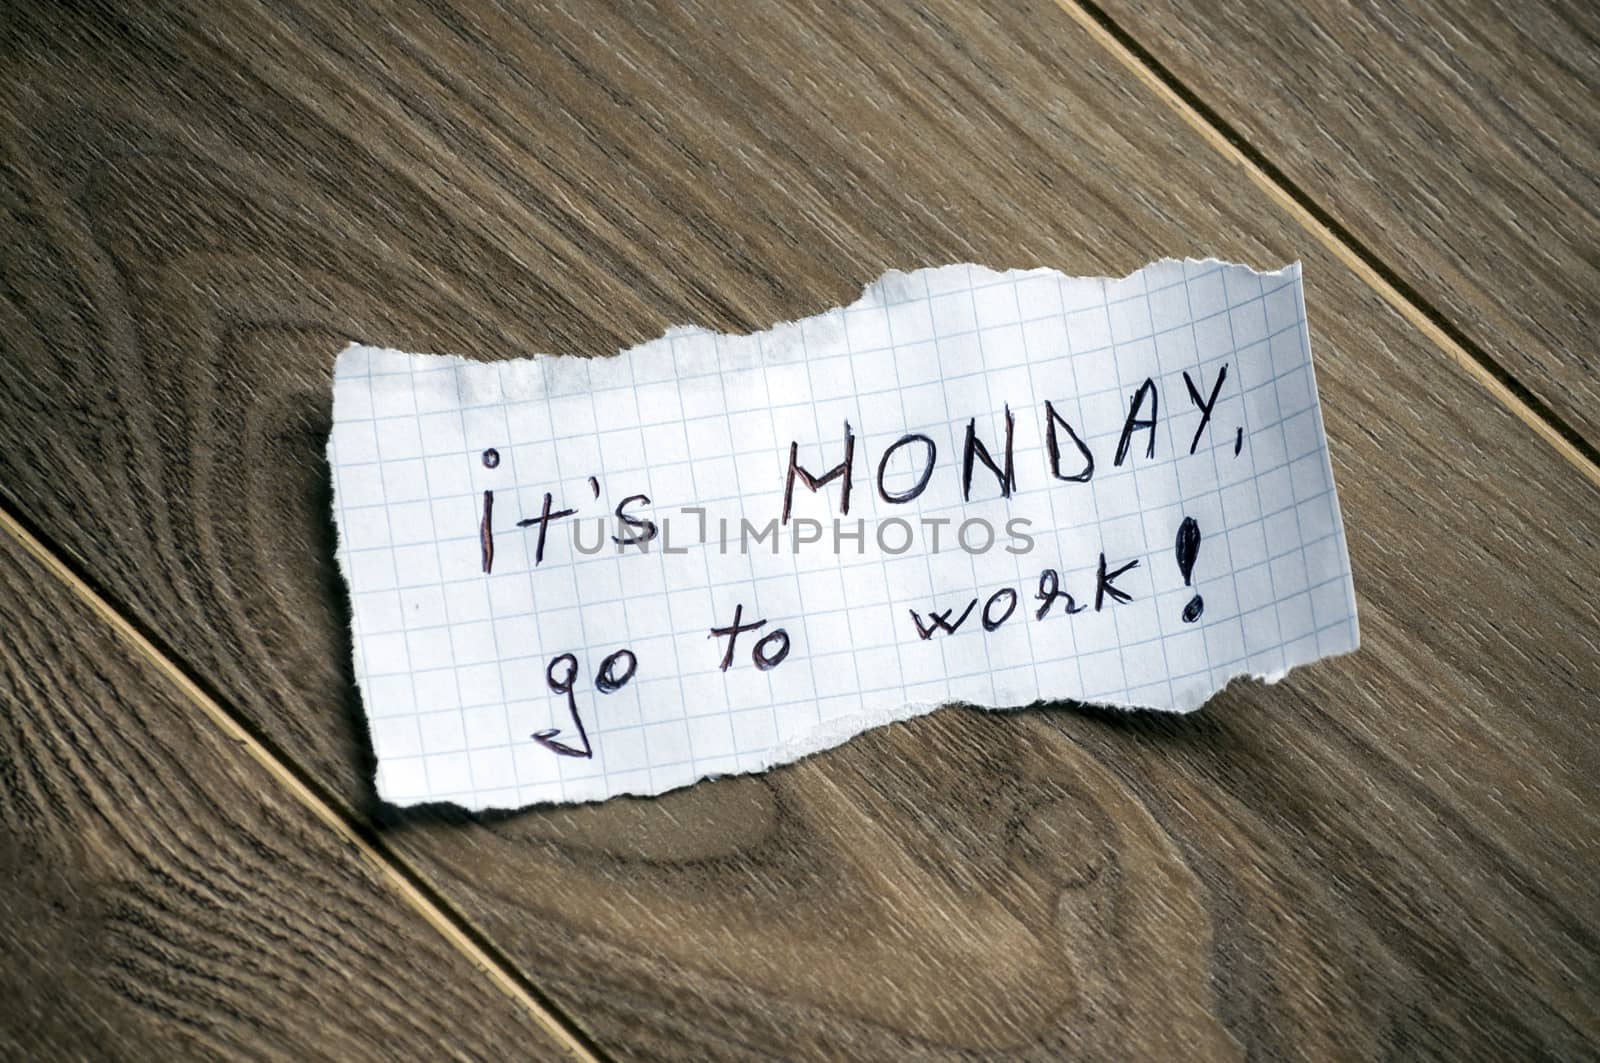 Monday message written on piece of paper, on a wood background.